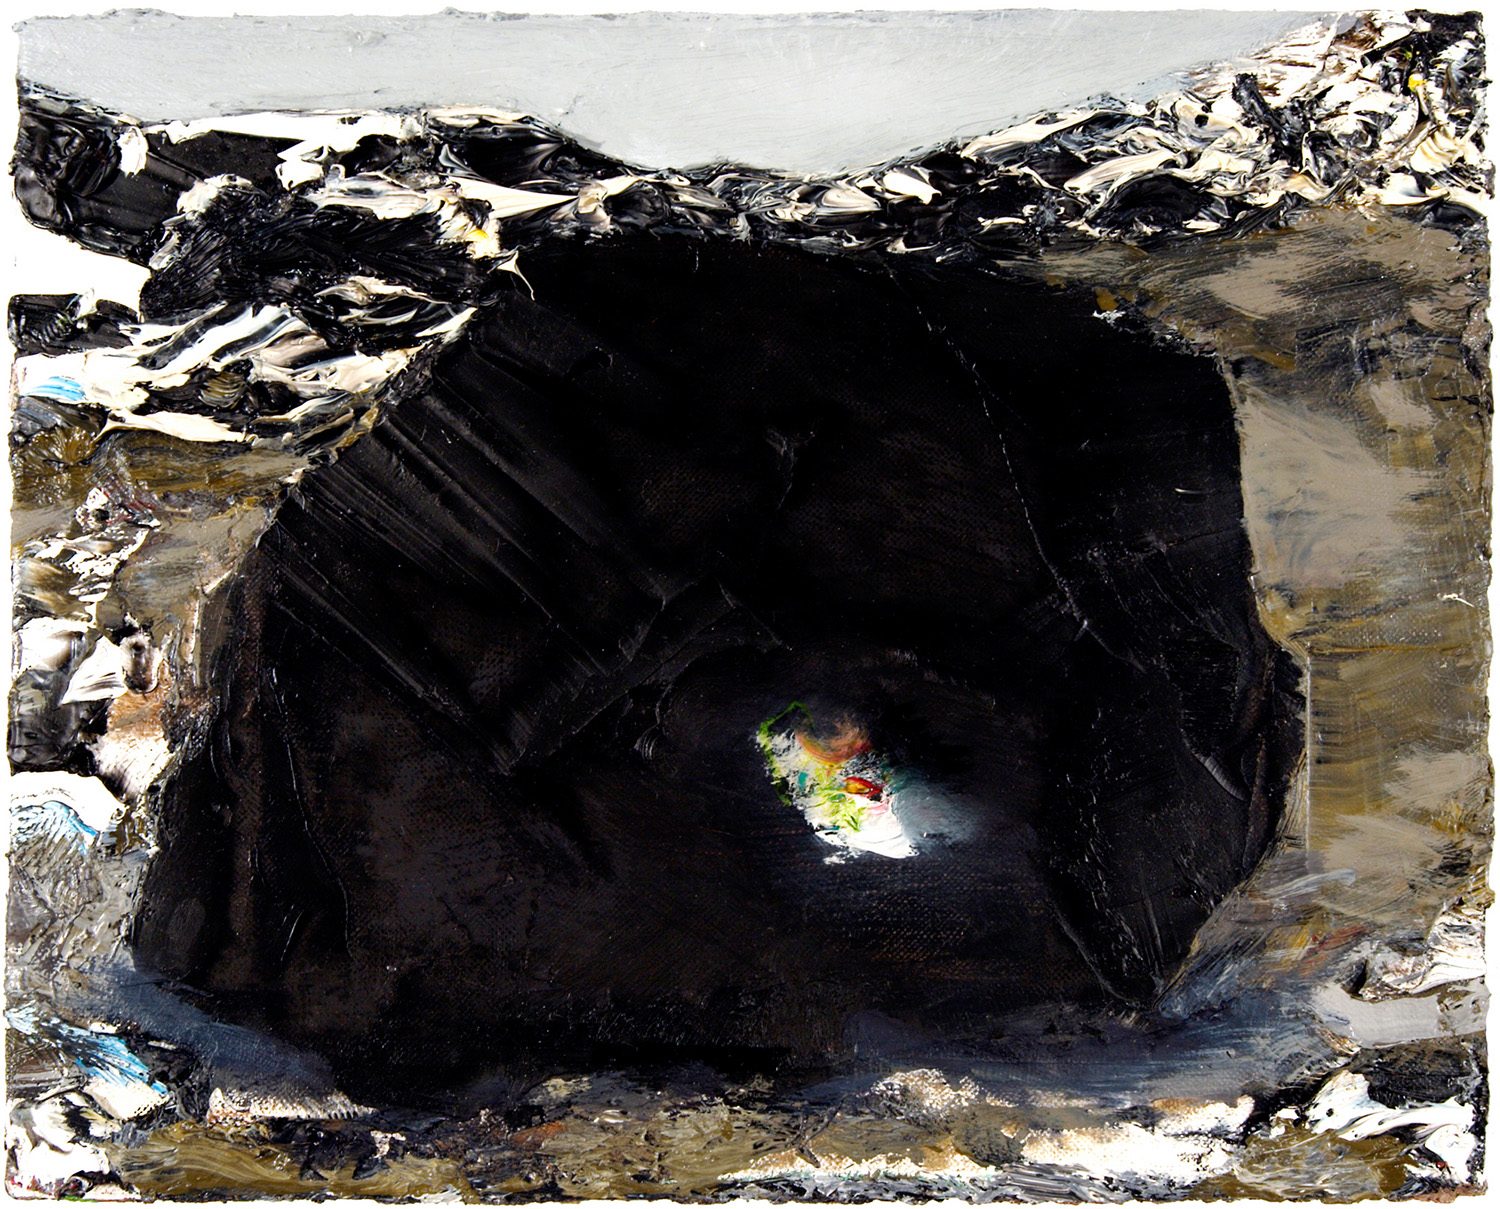   Found in Antarctica, The Puff That Will Save the World , 2006, oil on canvas, 8 x 10 inches 